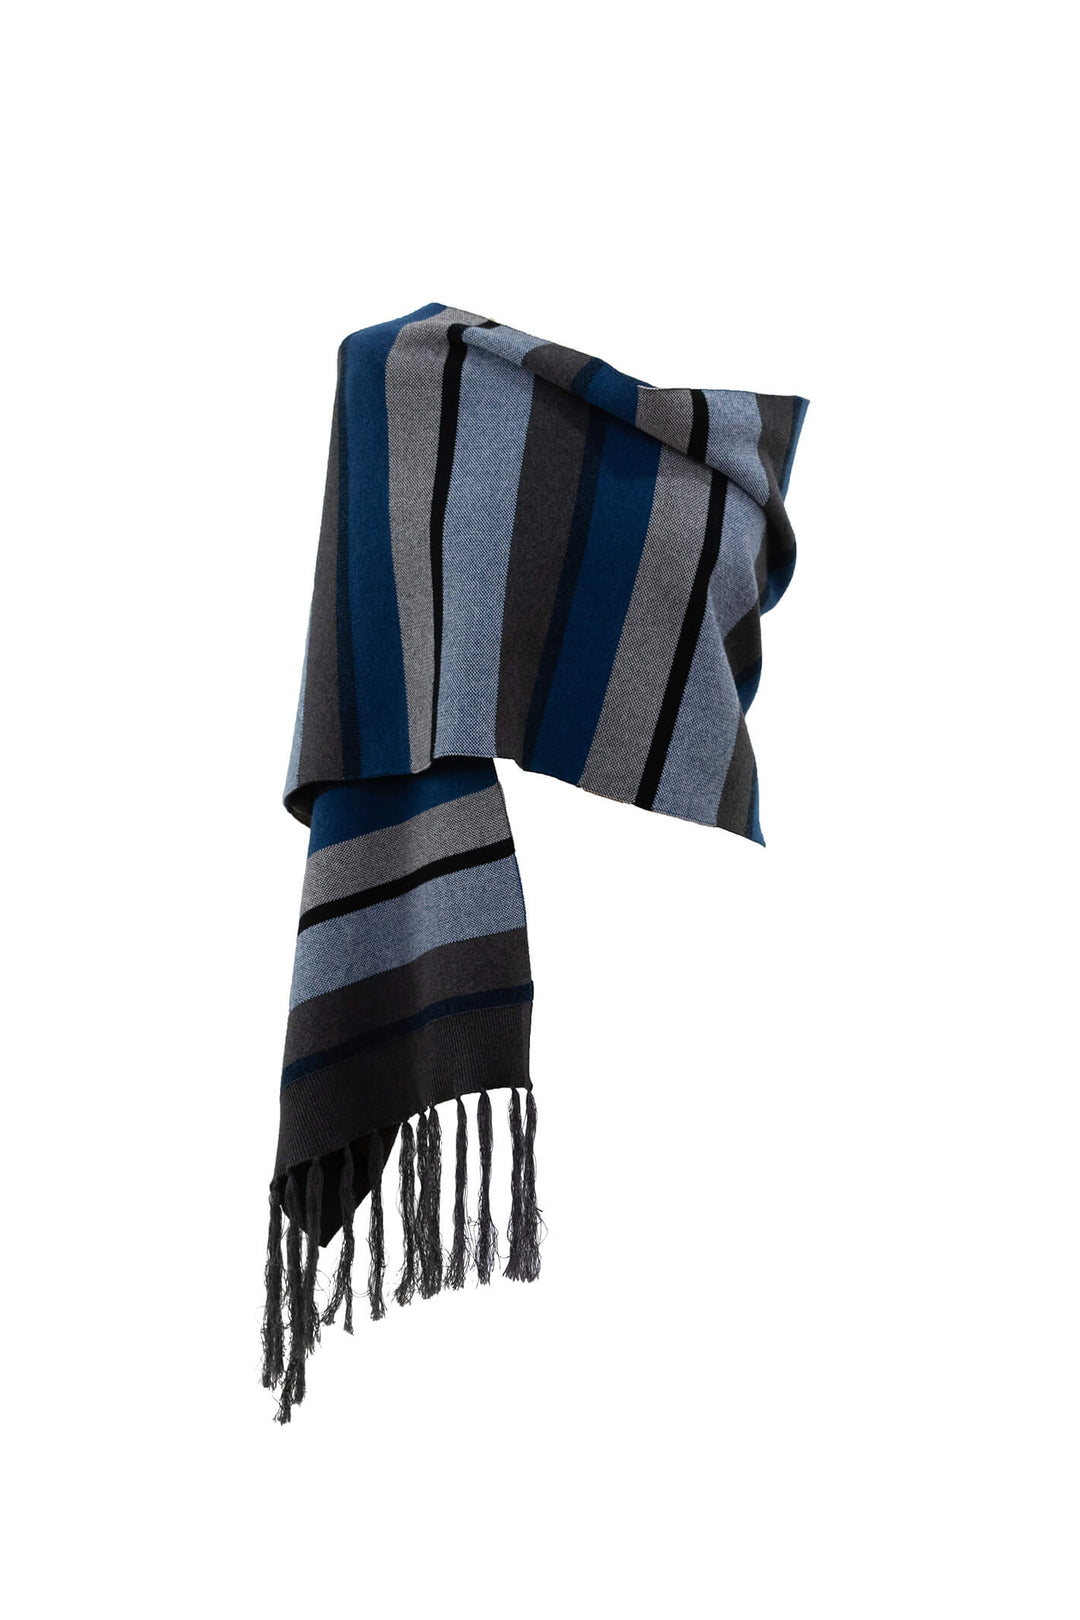 Marble 6389 170 Teal Striped Scarf With Tassels